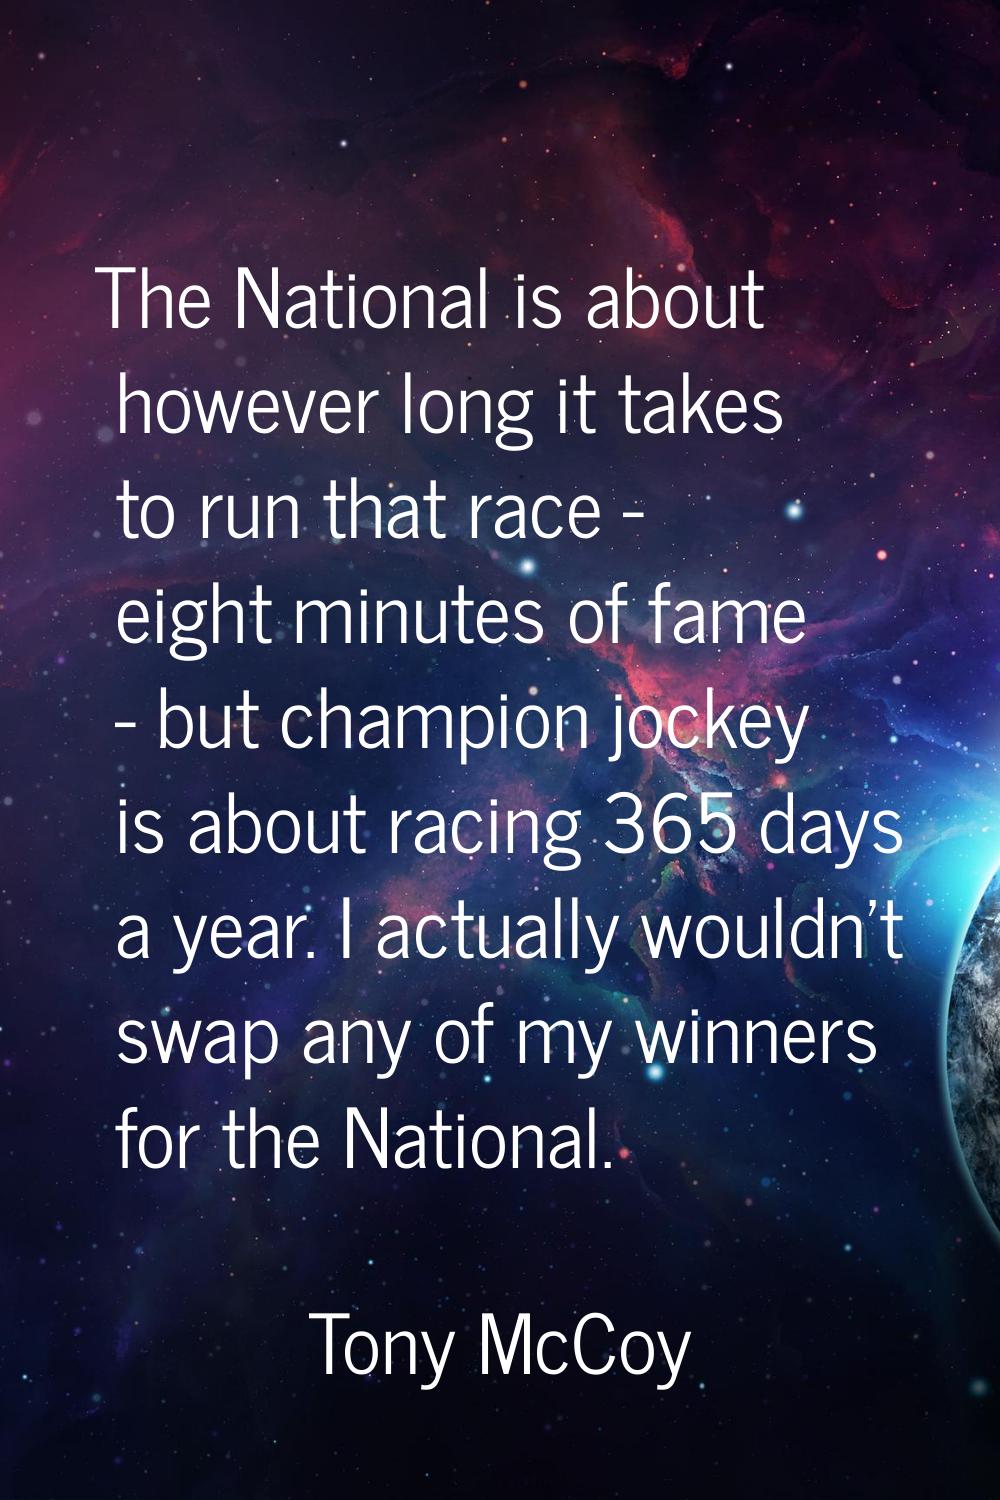 The National is about however long it takes to run that race - eight minutes of fame - but champion